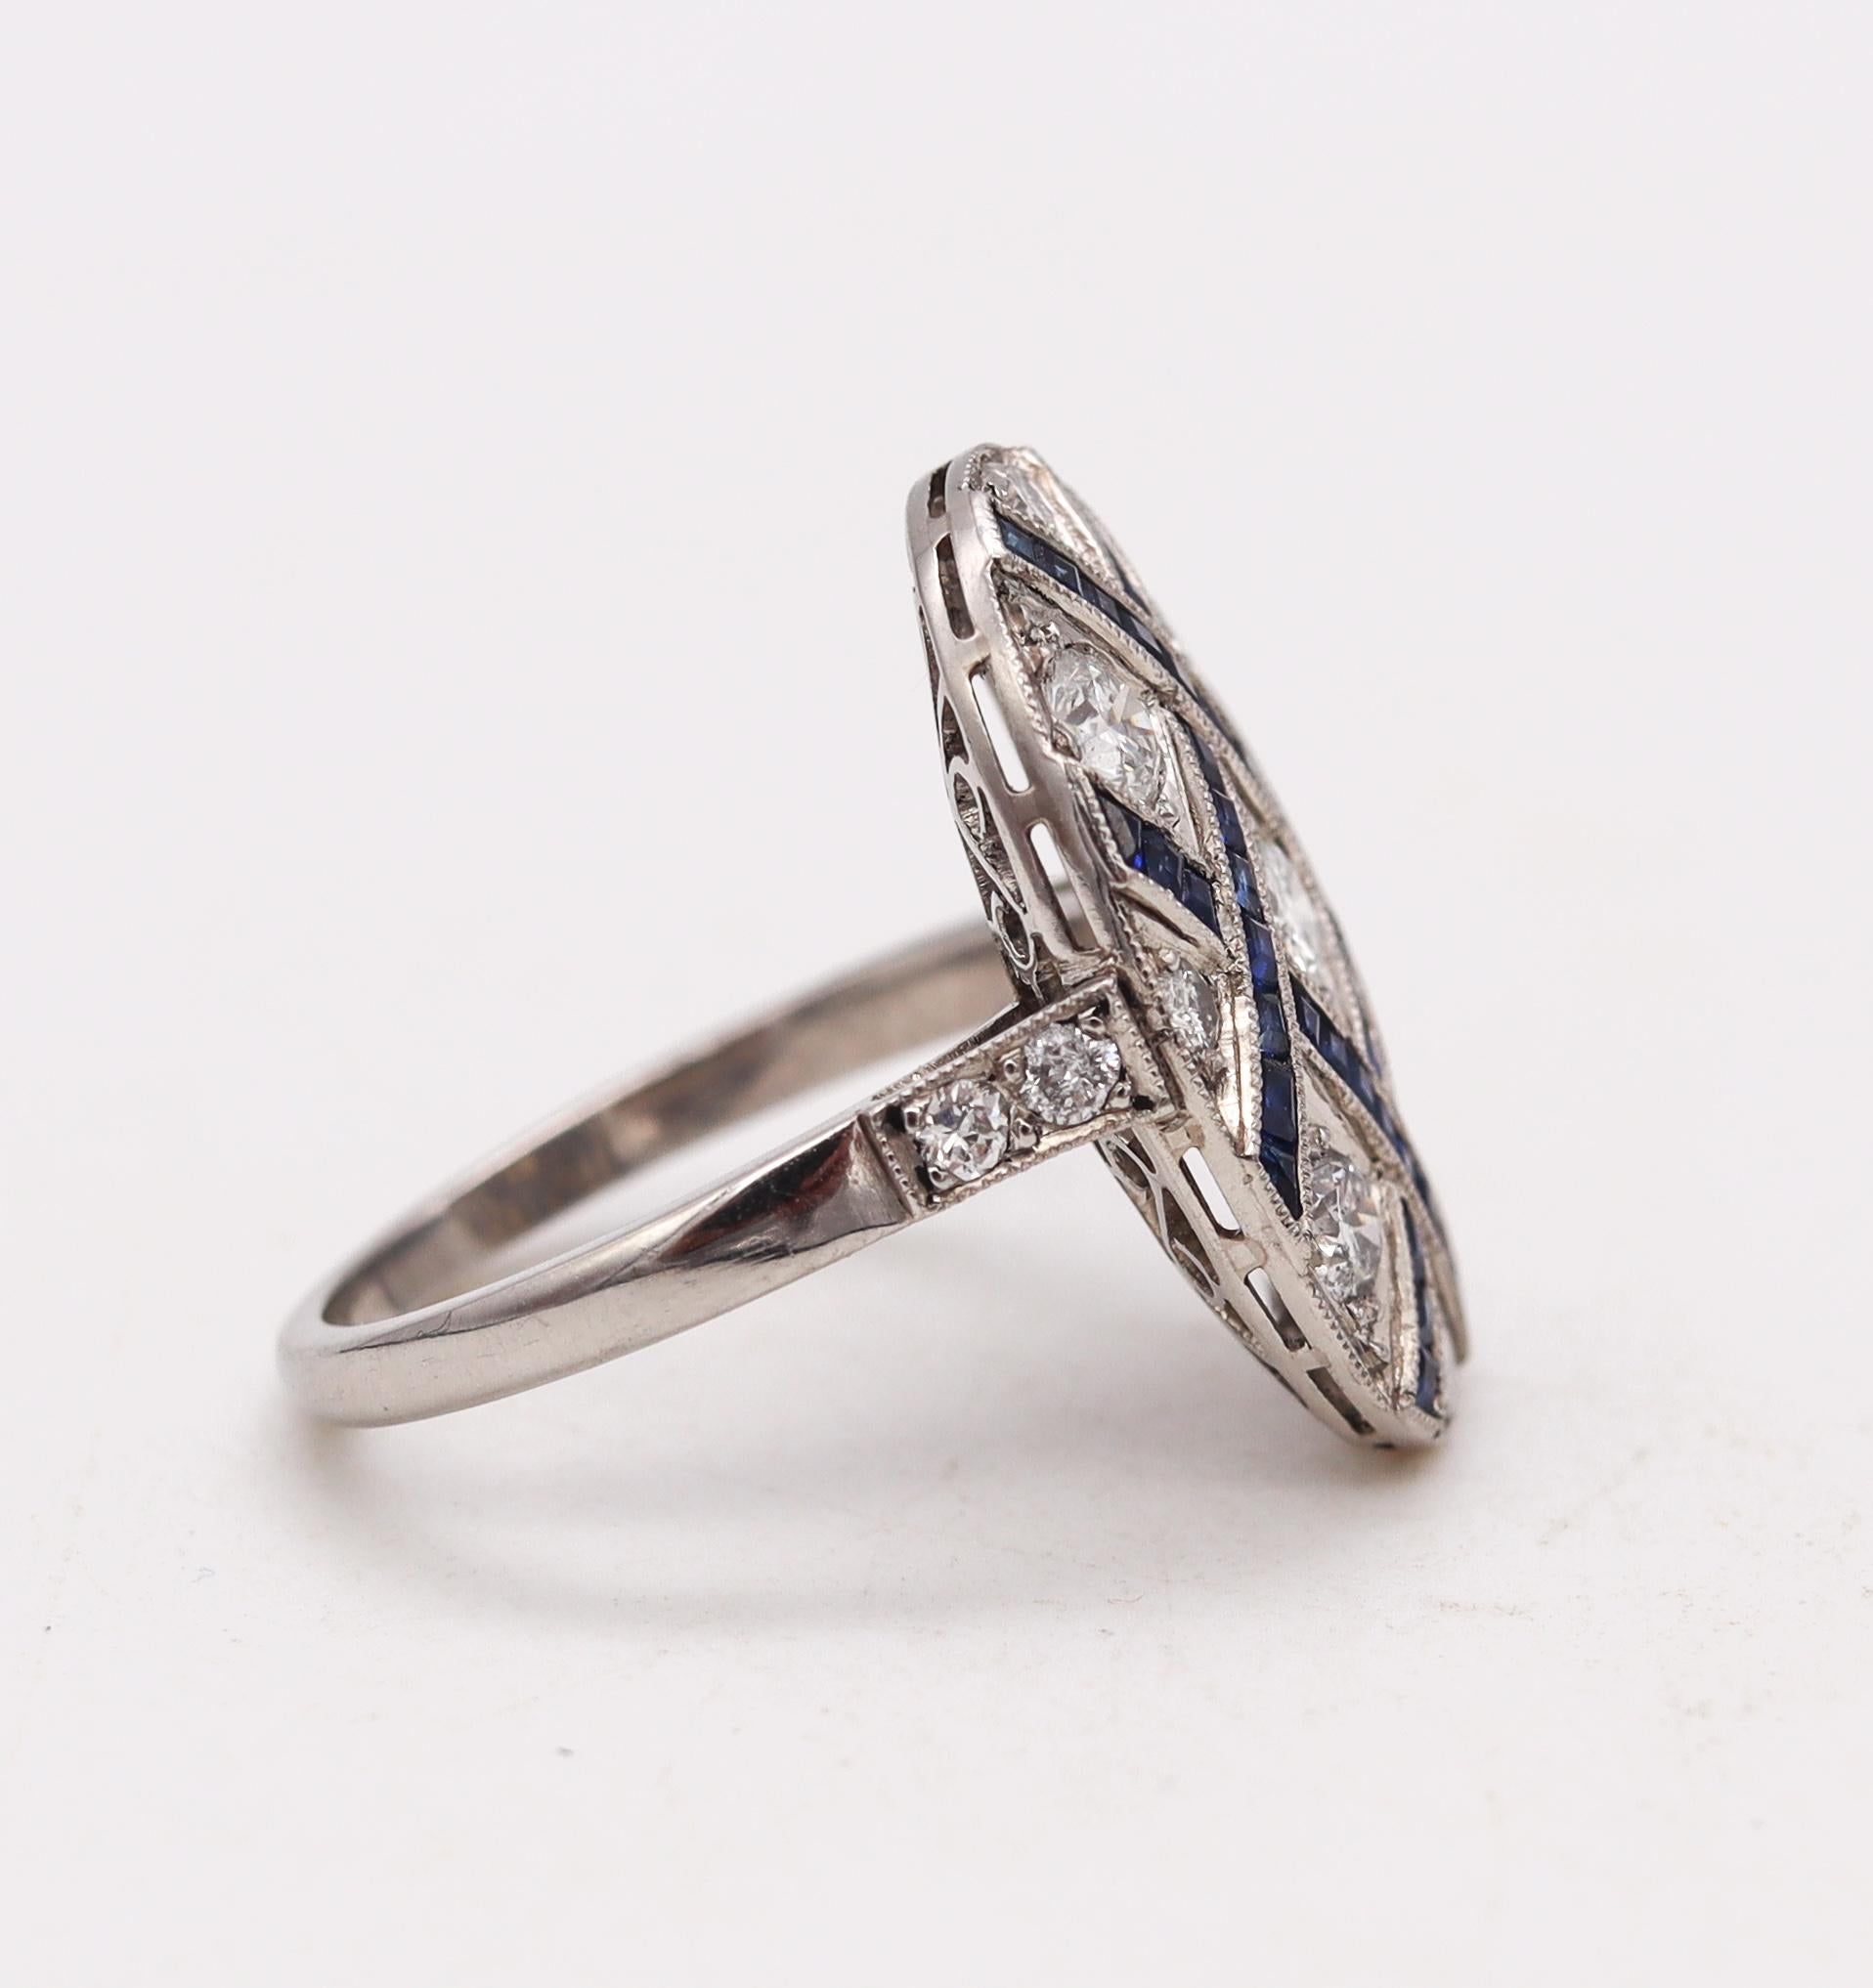 French Cut Art Deco 1930 Geometric Ring in Platinum with 2.34 Cts in Diamonds & Sapphires